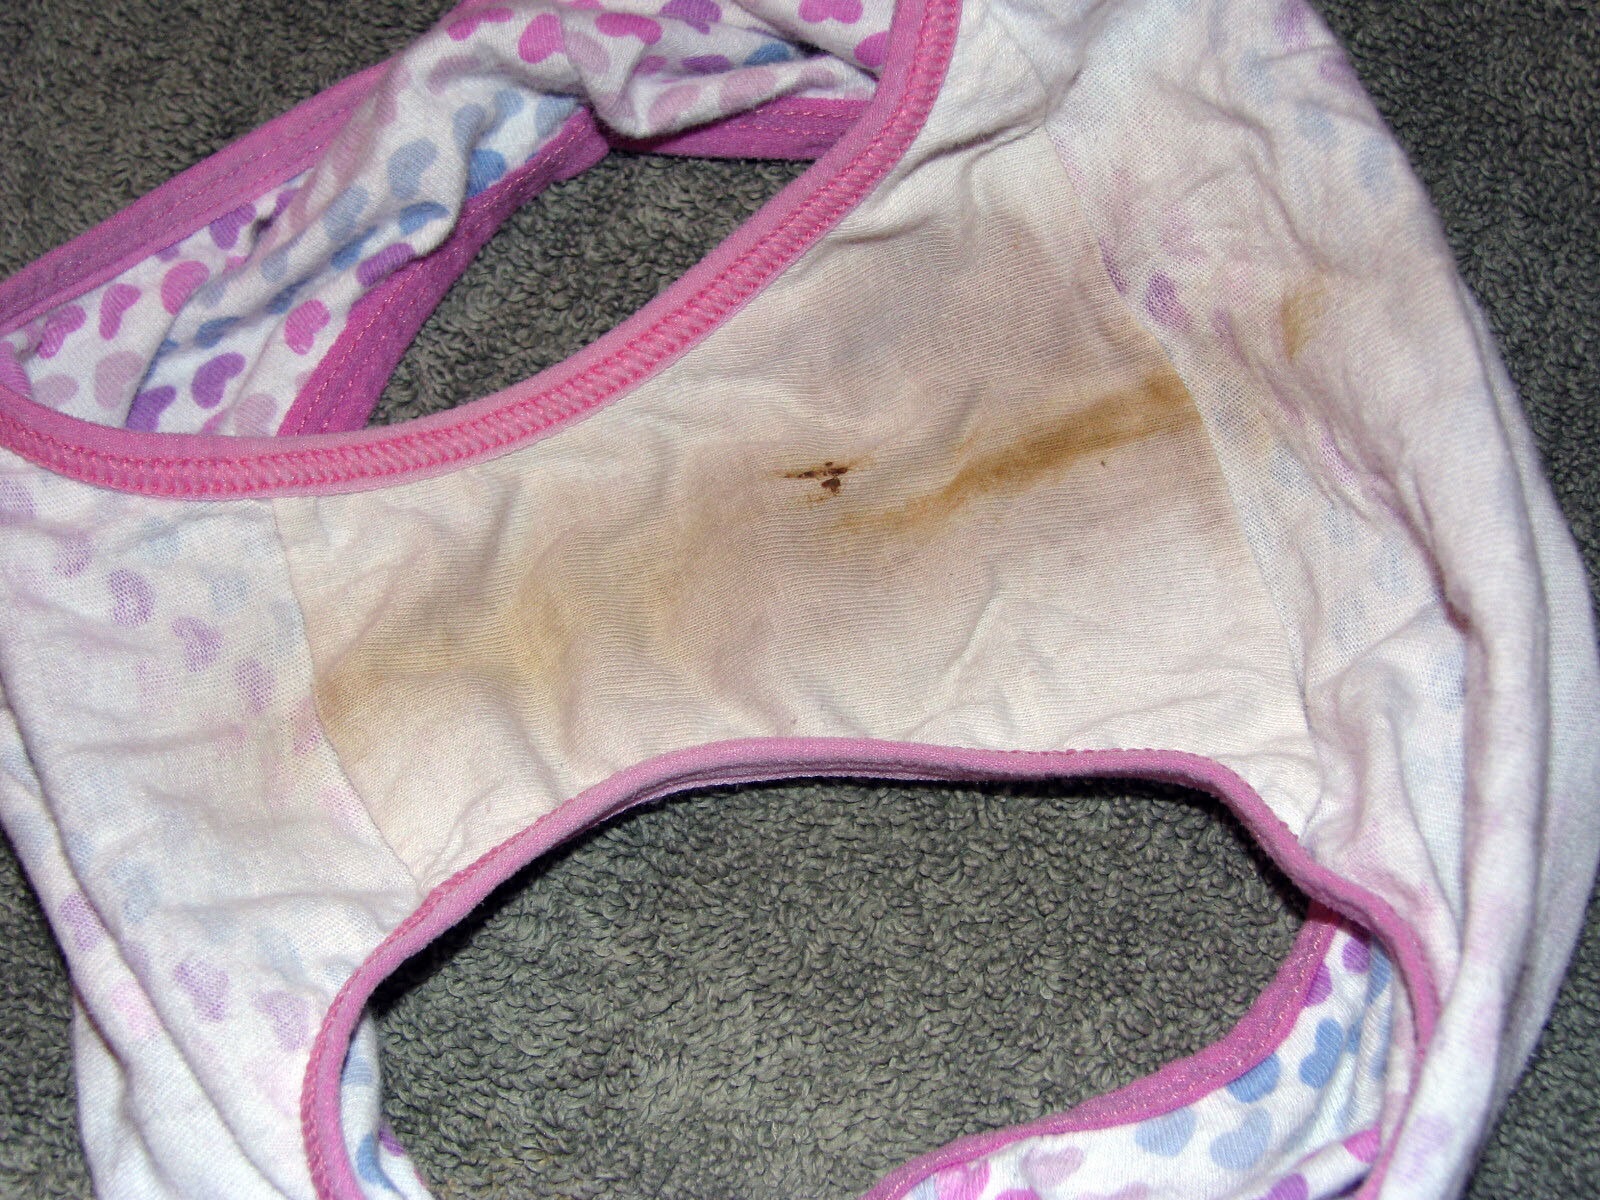 Dirty panties pictures